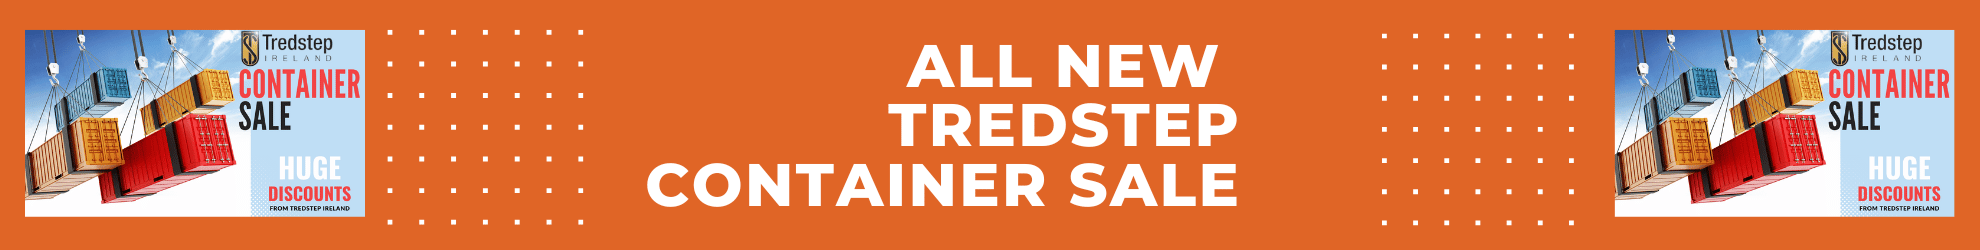 Tredstep Container Sale